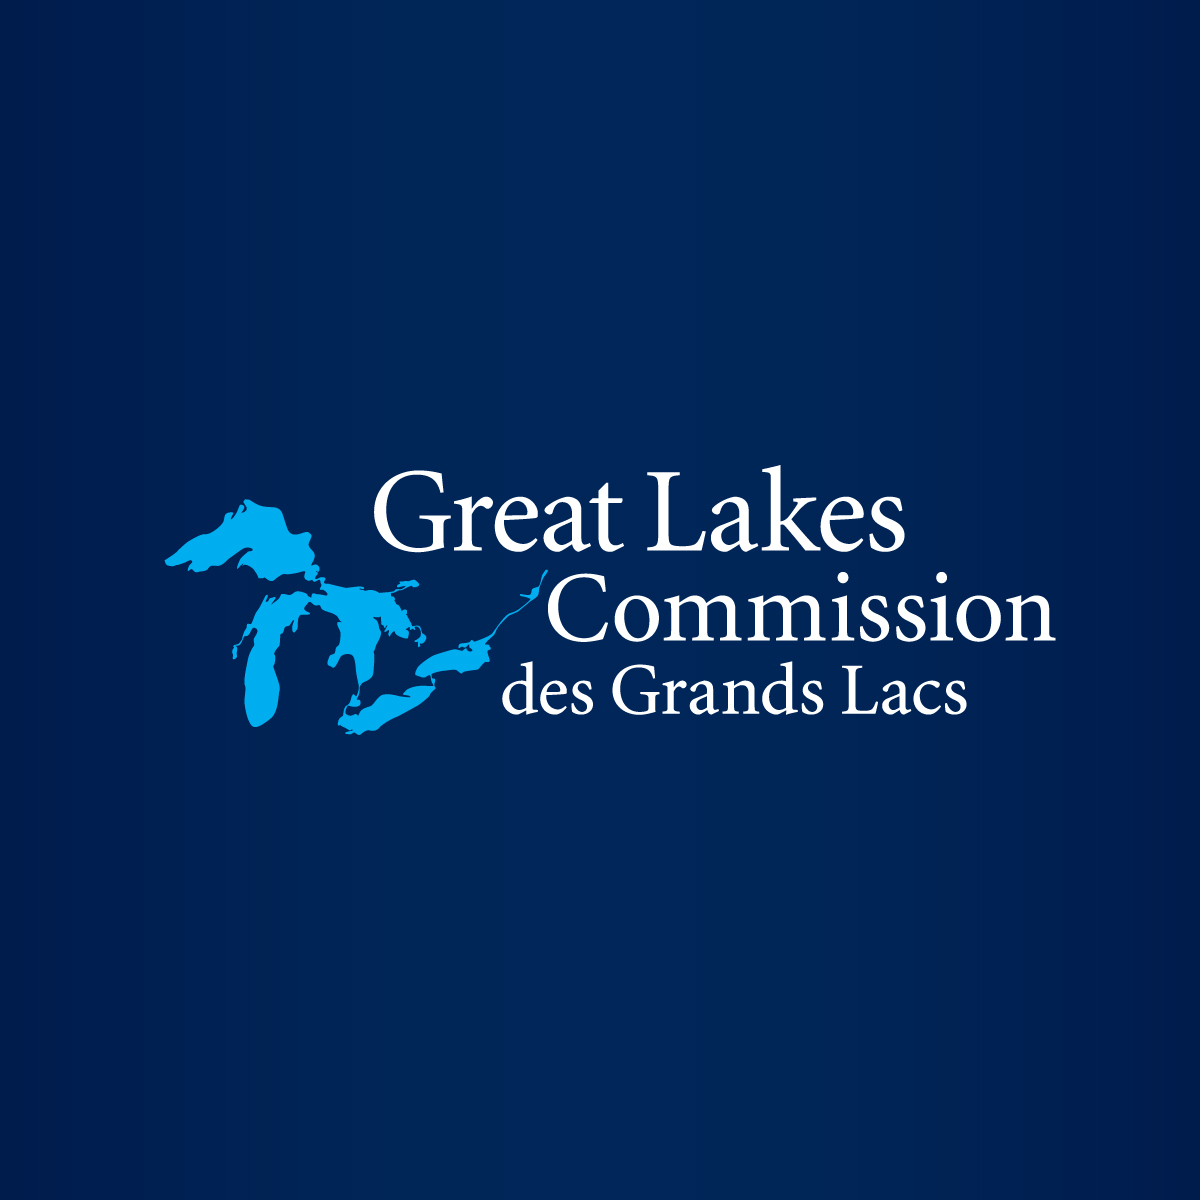 a changing climate could cost great lakes communities billions heres whats being done about it